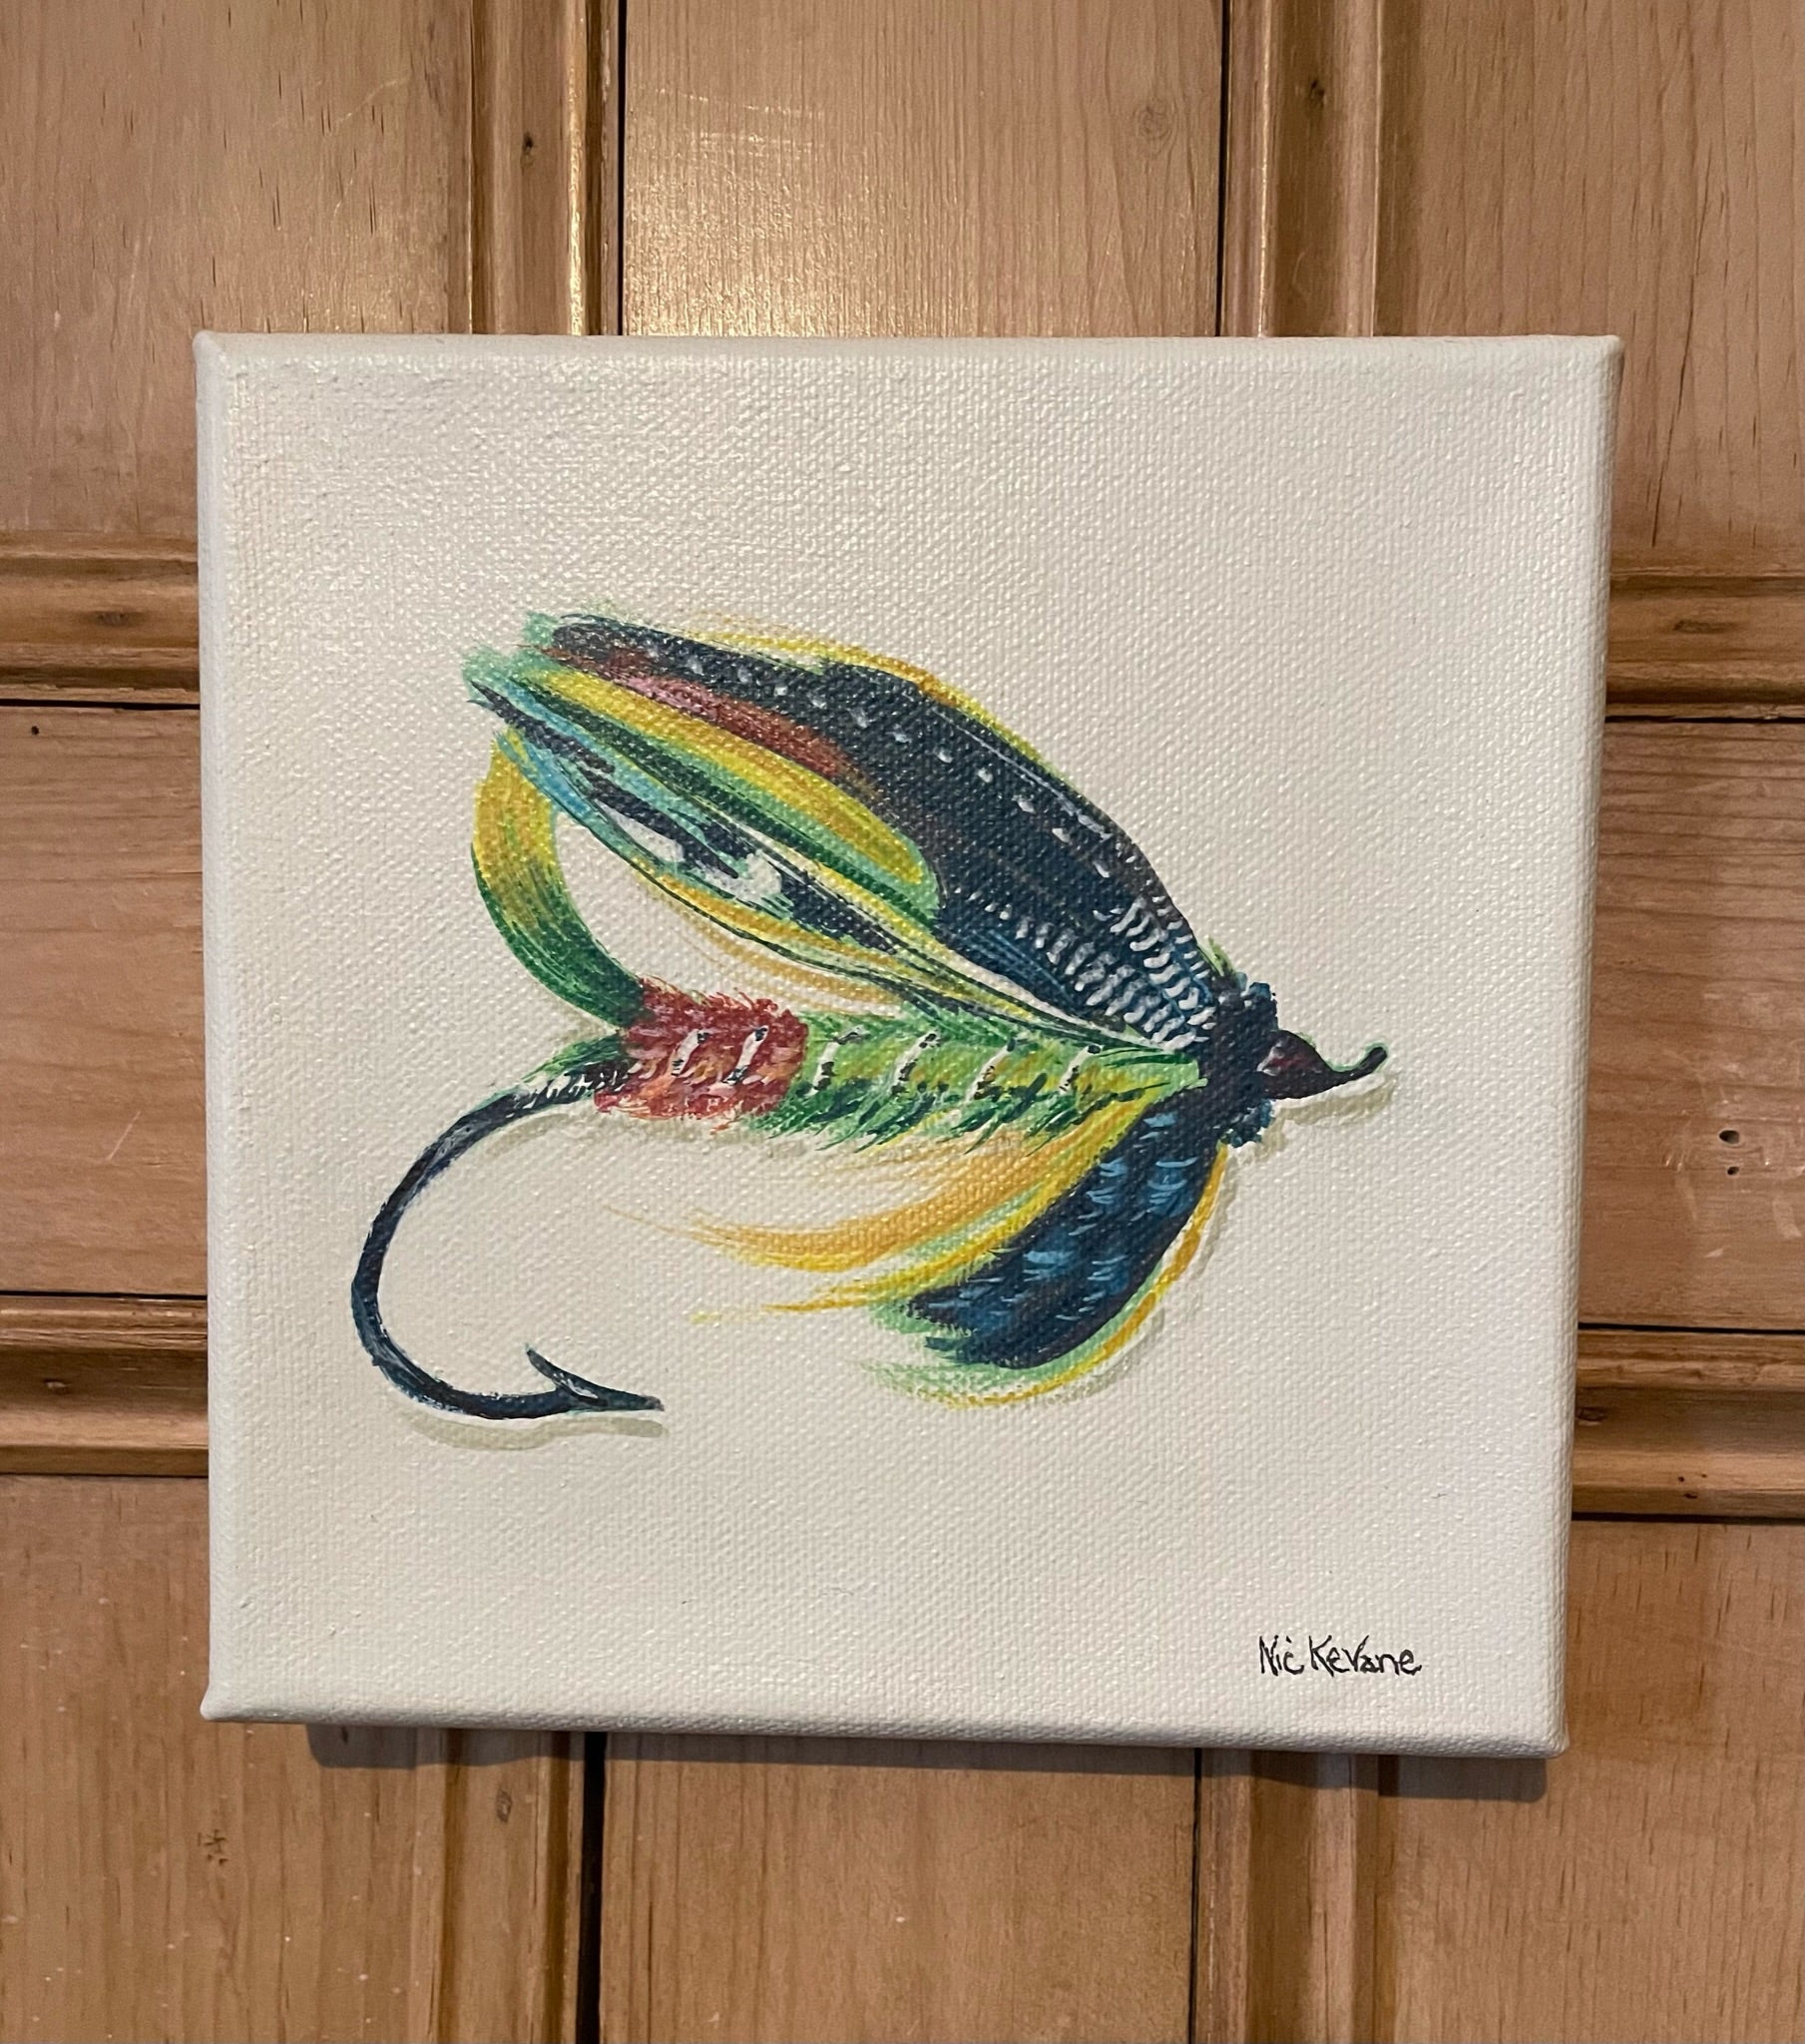 Green Fishing Fly - 15cm x 15cm mini paintings depicting various countryside subjects.